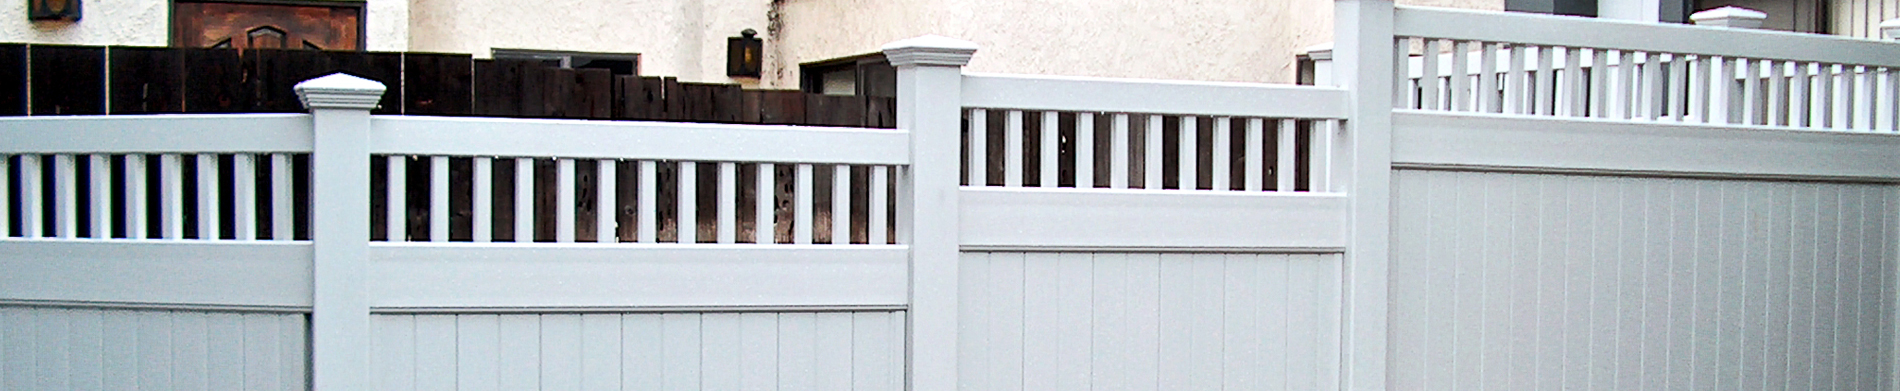 Look for an affordable vinyl fence panel? Your search ends at Duramax